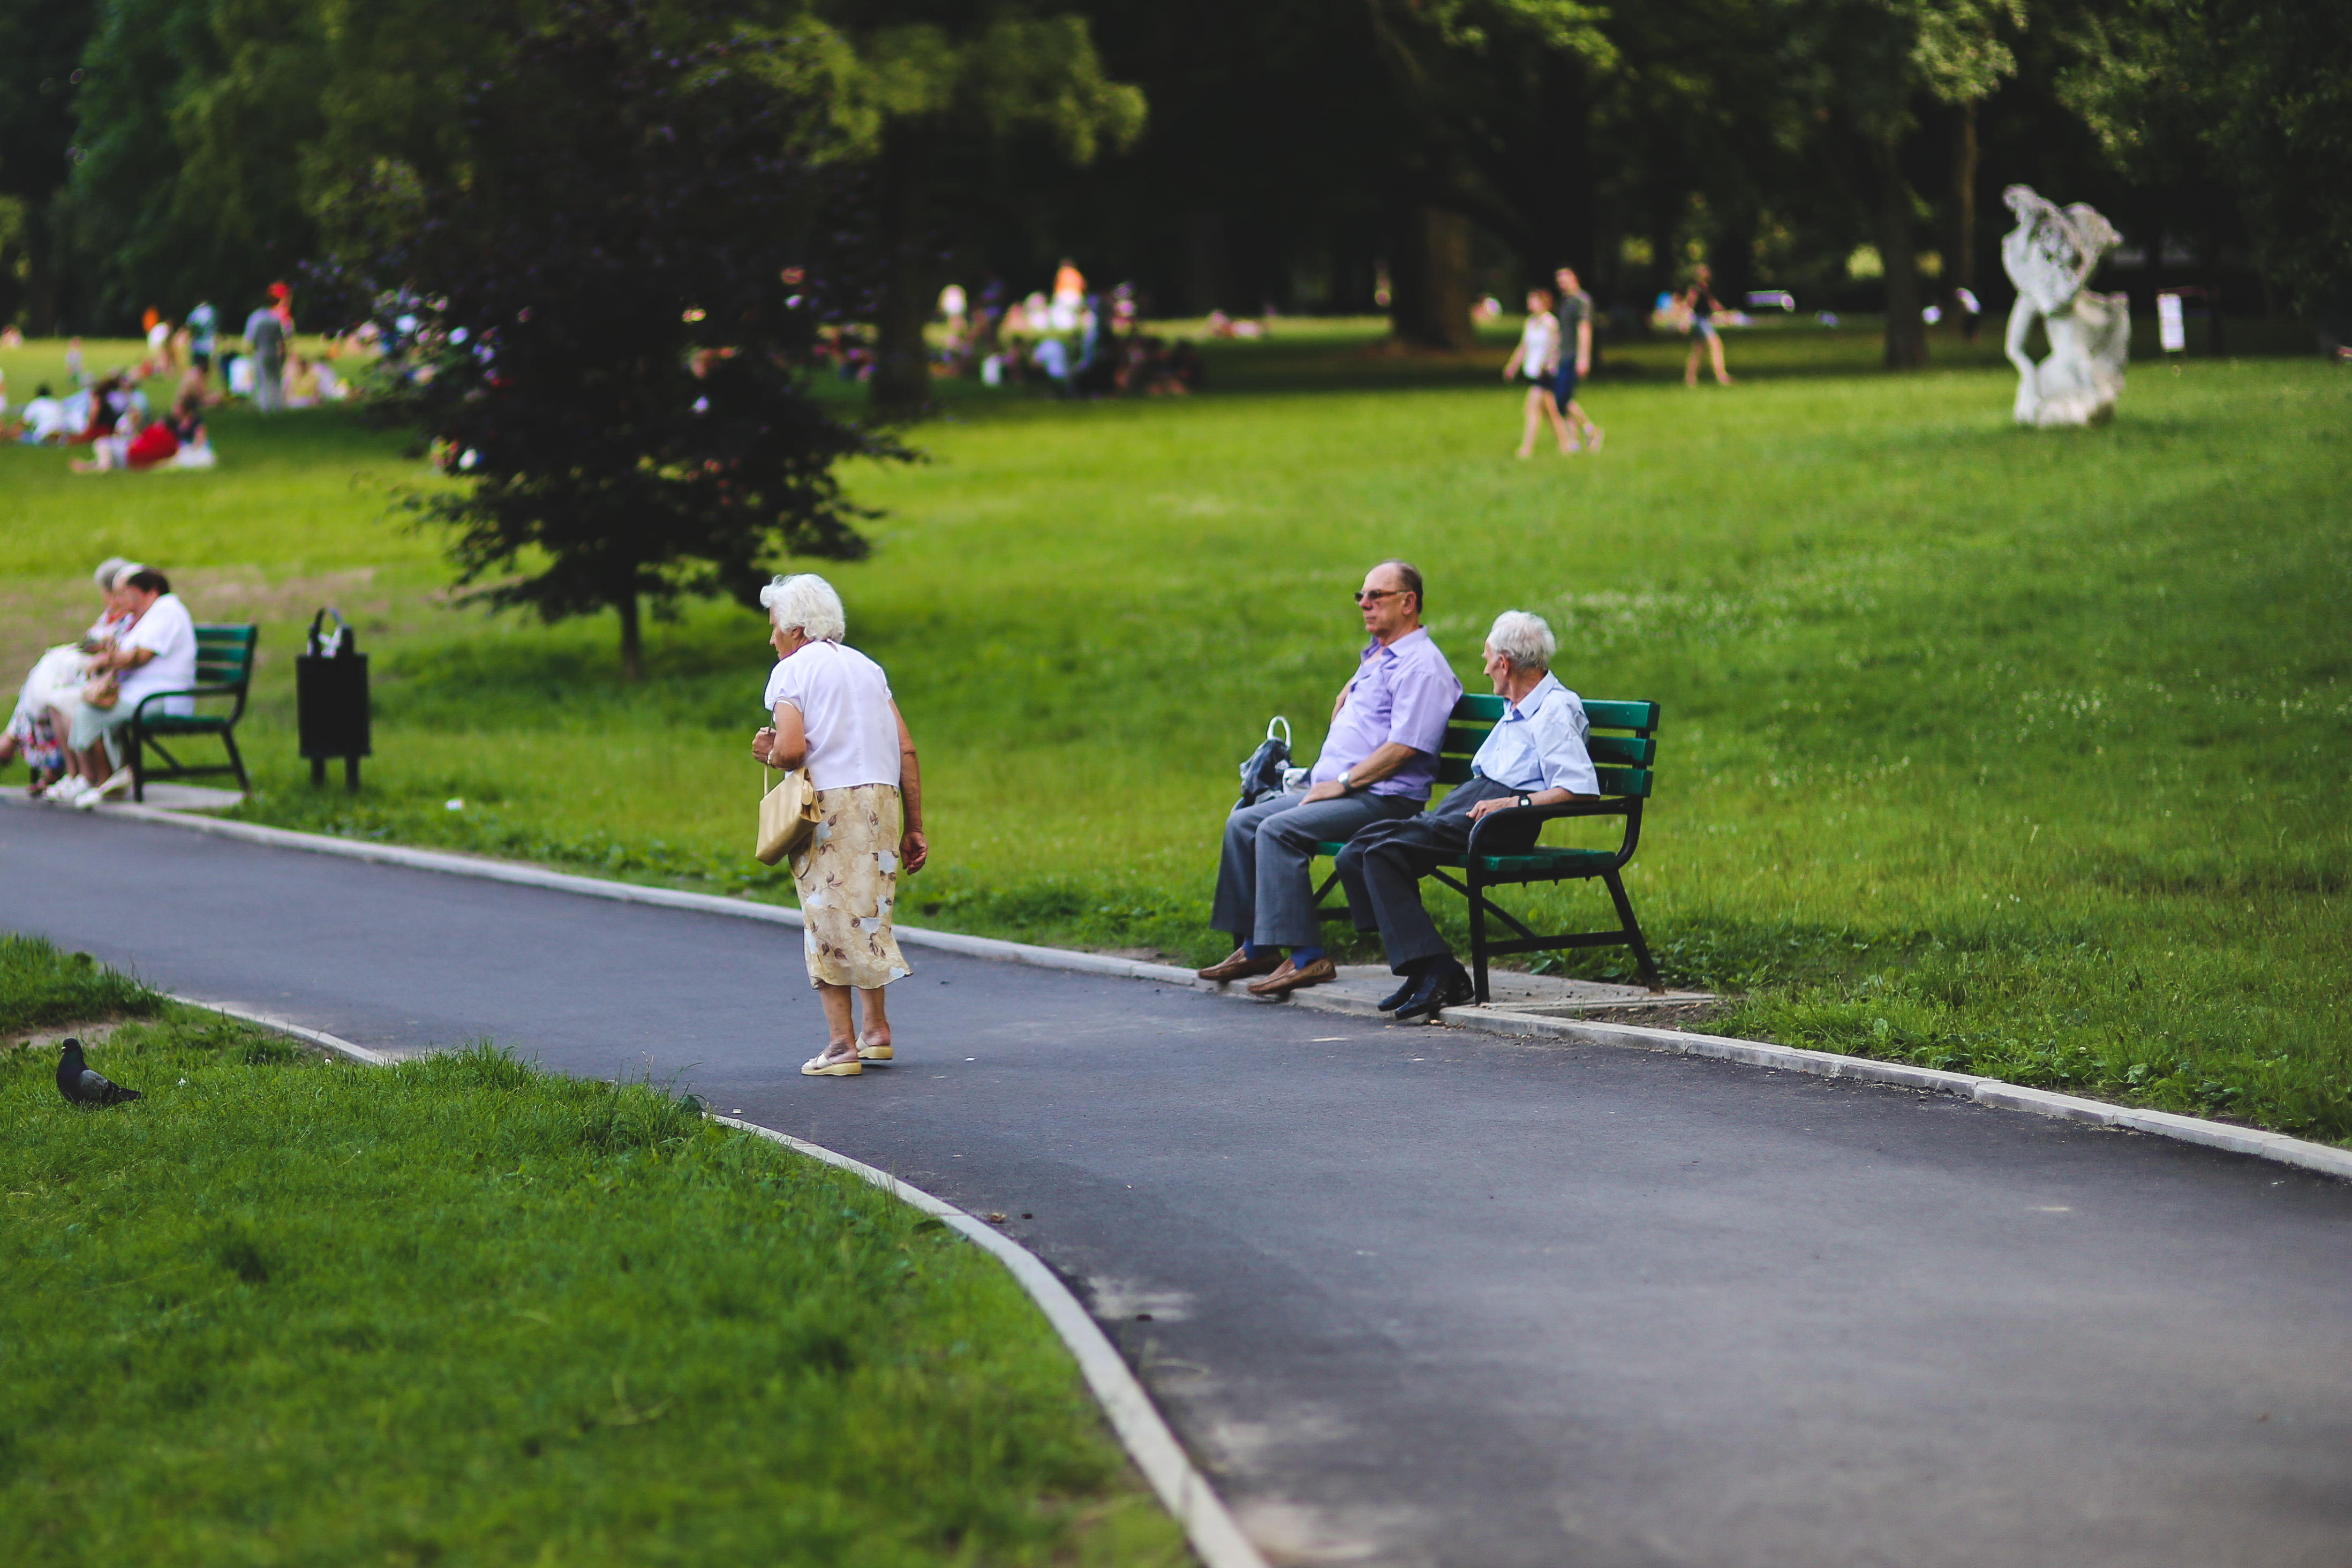 Seniors sitting on benches in a park and a woman walking in front of them.